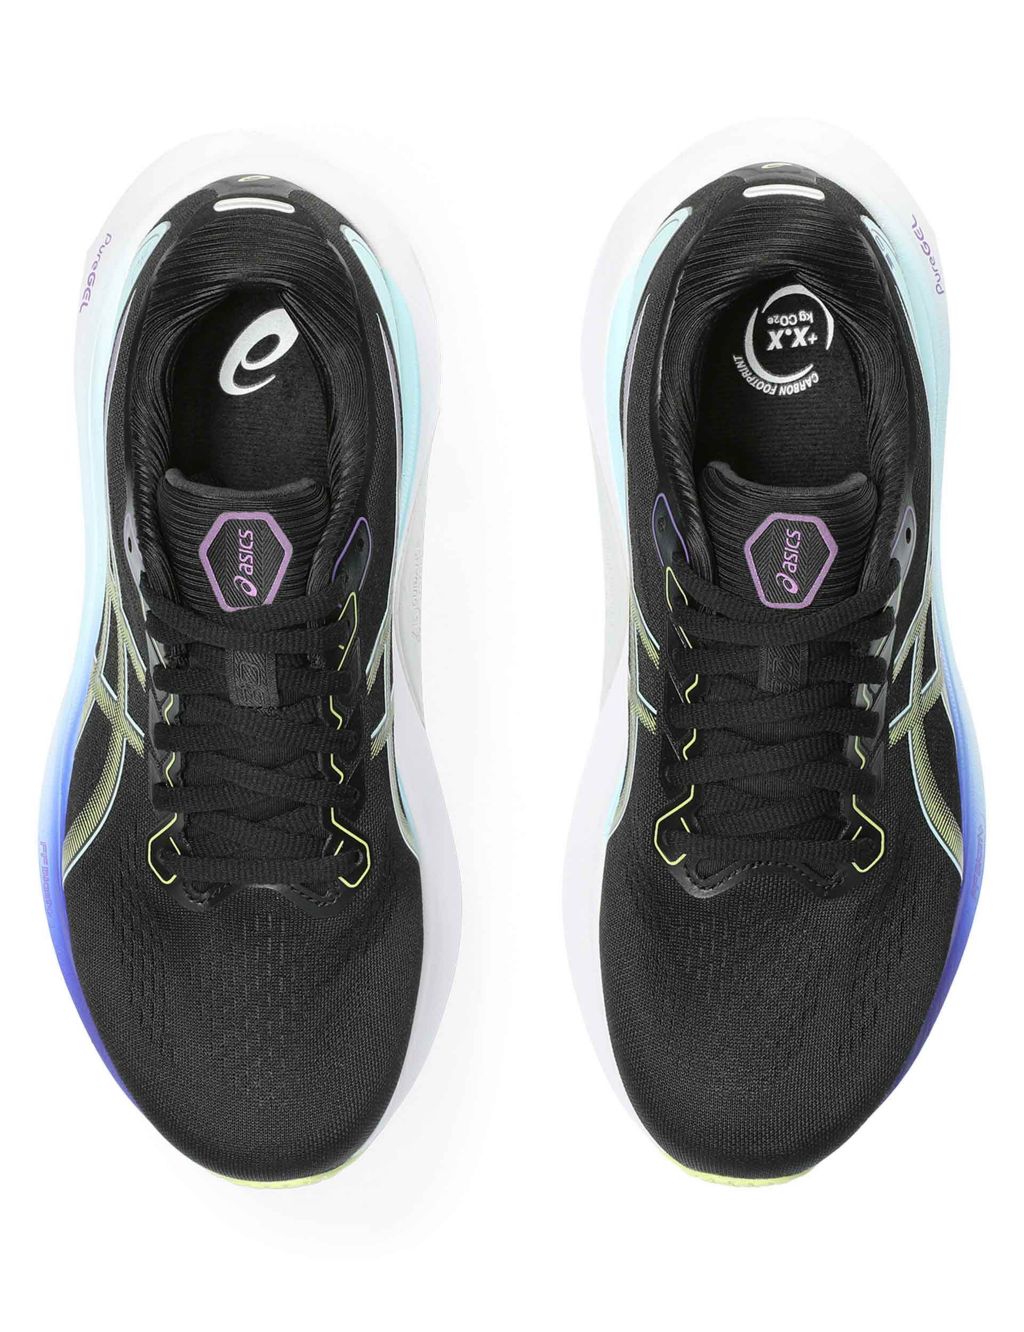 Gel-Kayano 30 Lace Up Trainers image 3